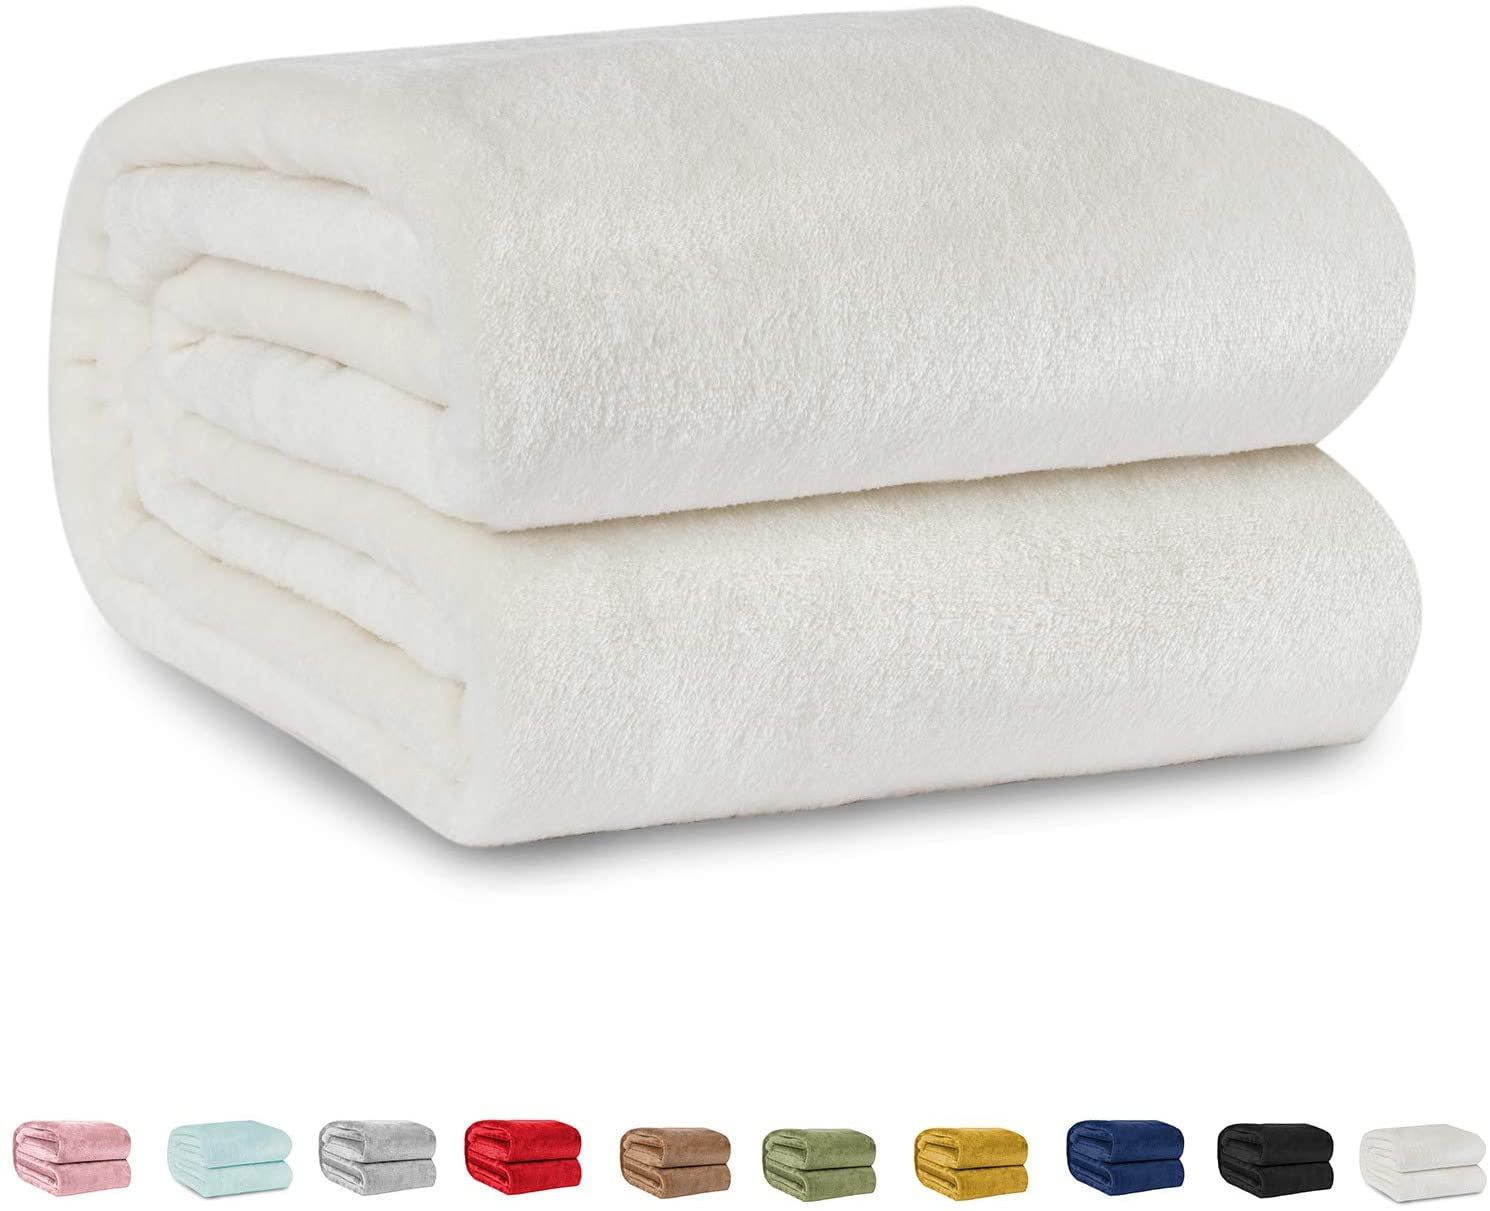 FLEECE BLANKET Super Soft Luxurious Plush Throw Solid Color White 50" x 60" NEW 